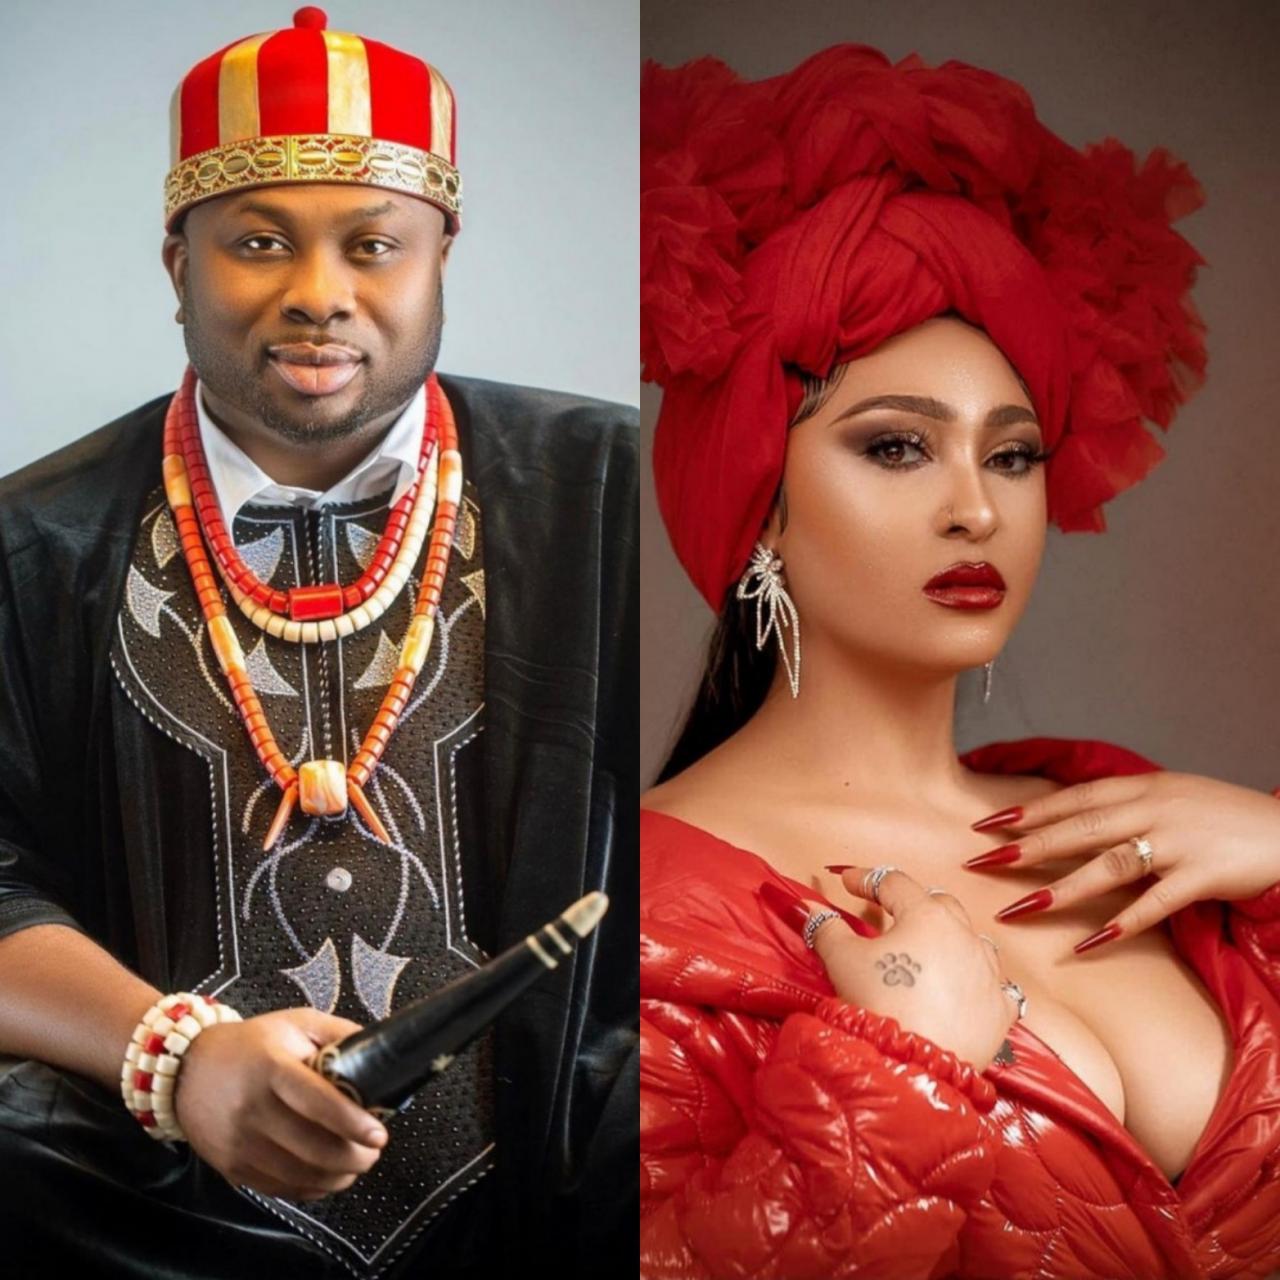 "The Queen of all queens" Olakunle Churchill celebrates wife Rosy Meurer as she turns 30